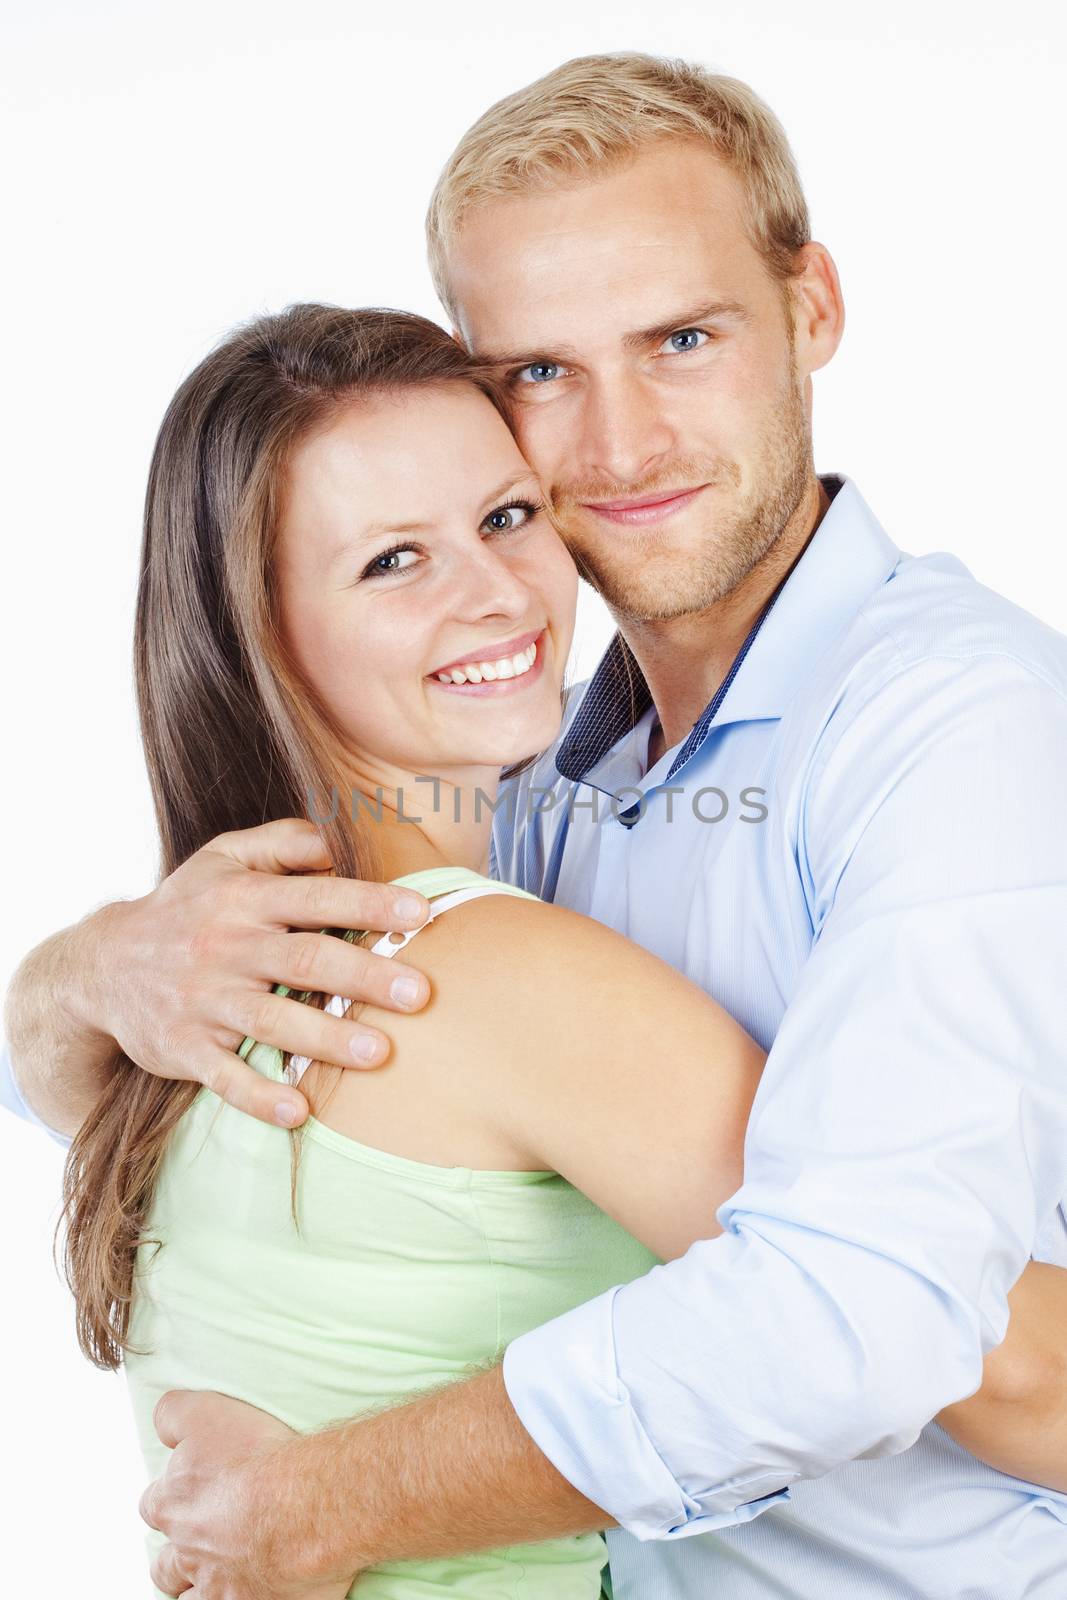 Portrait of a Happy Young Couple Smiling Looking - Isolated on White